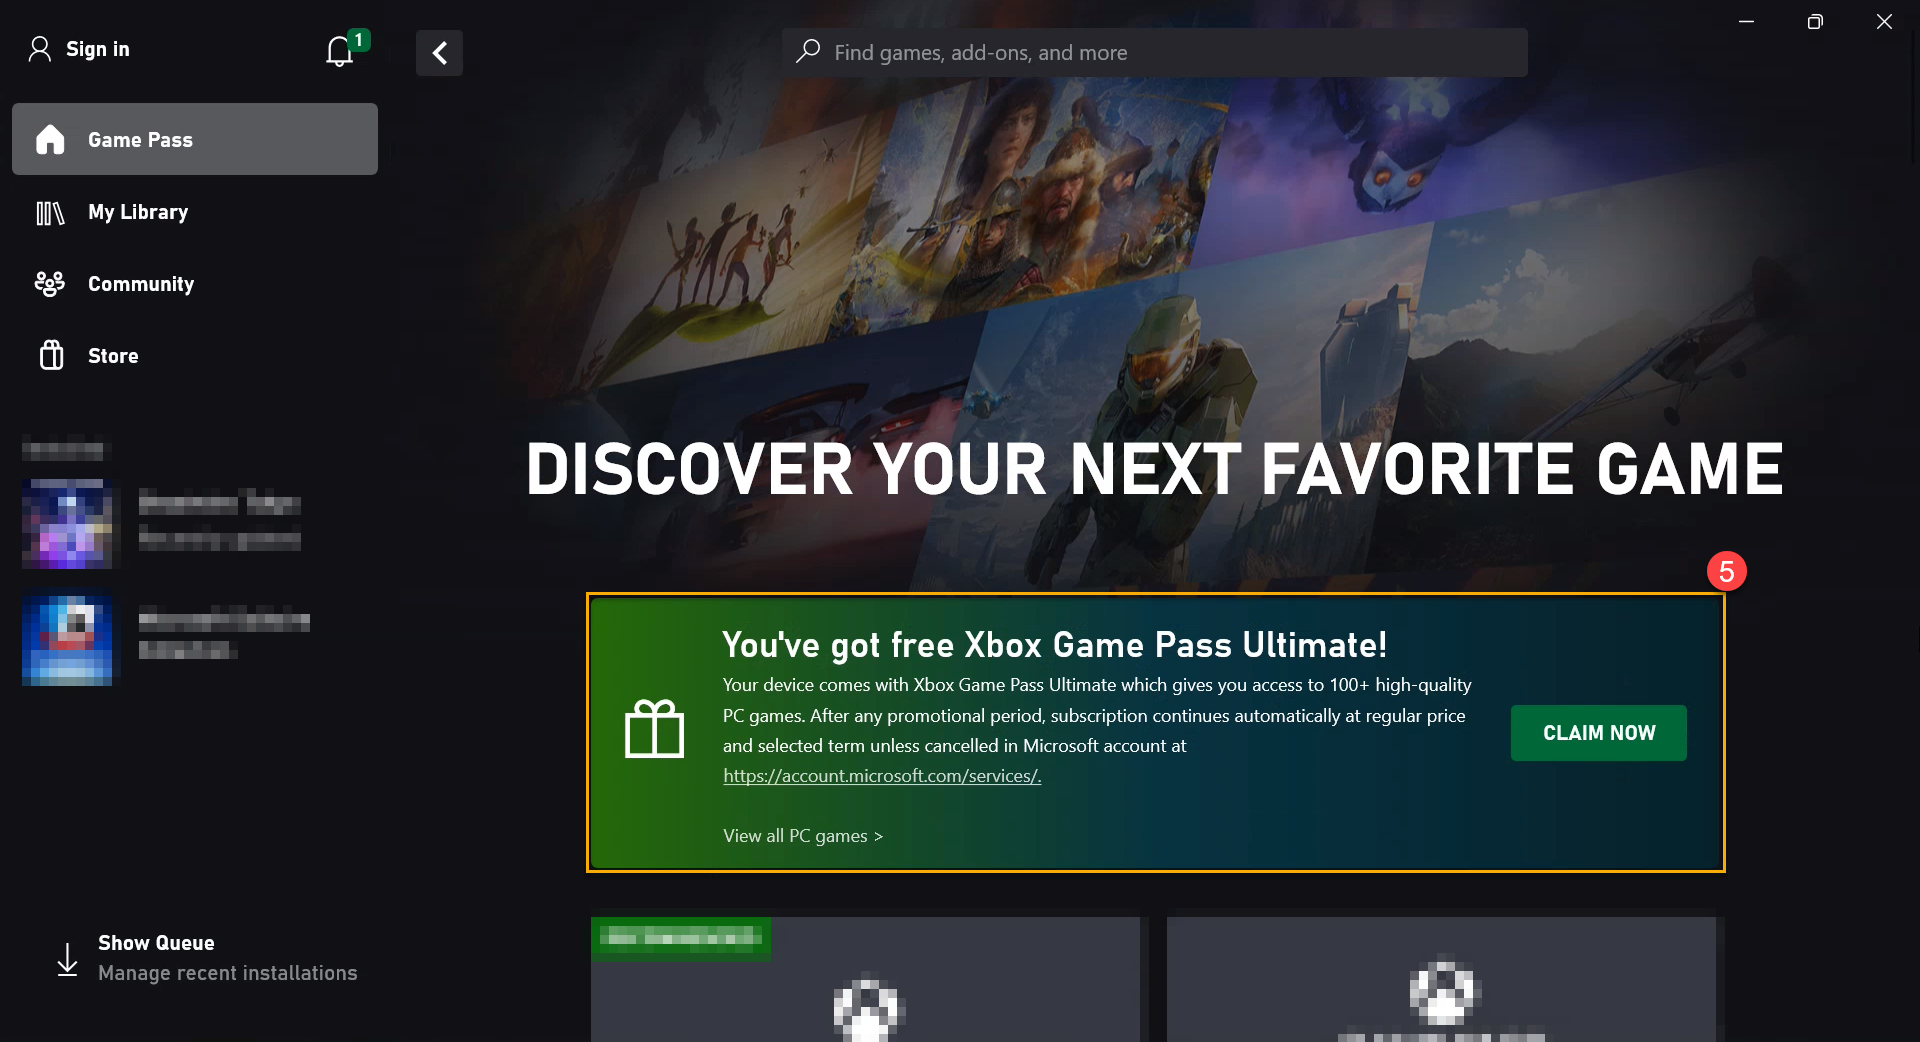 Where to claim free Xbox Game Pass Ultimate?